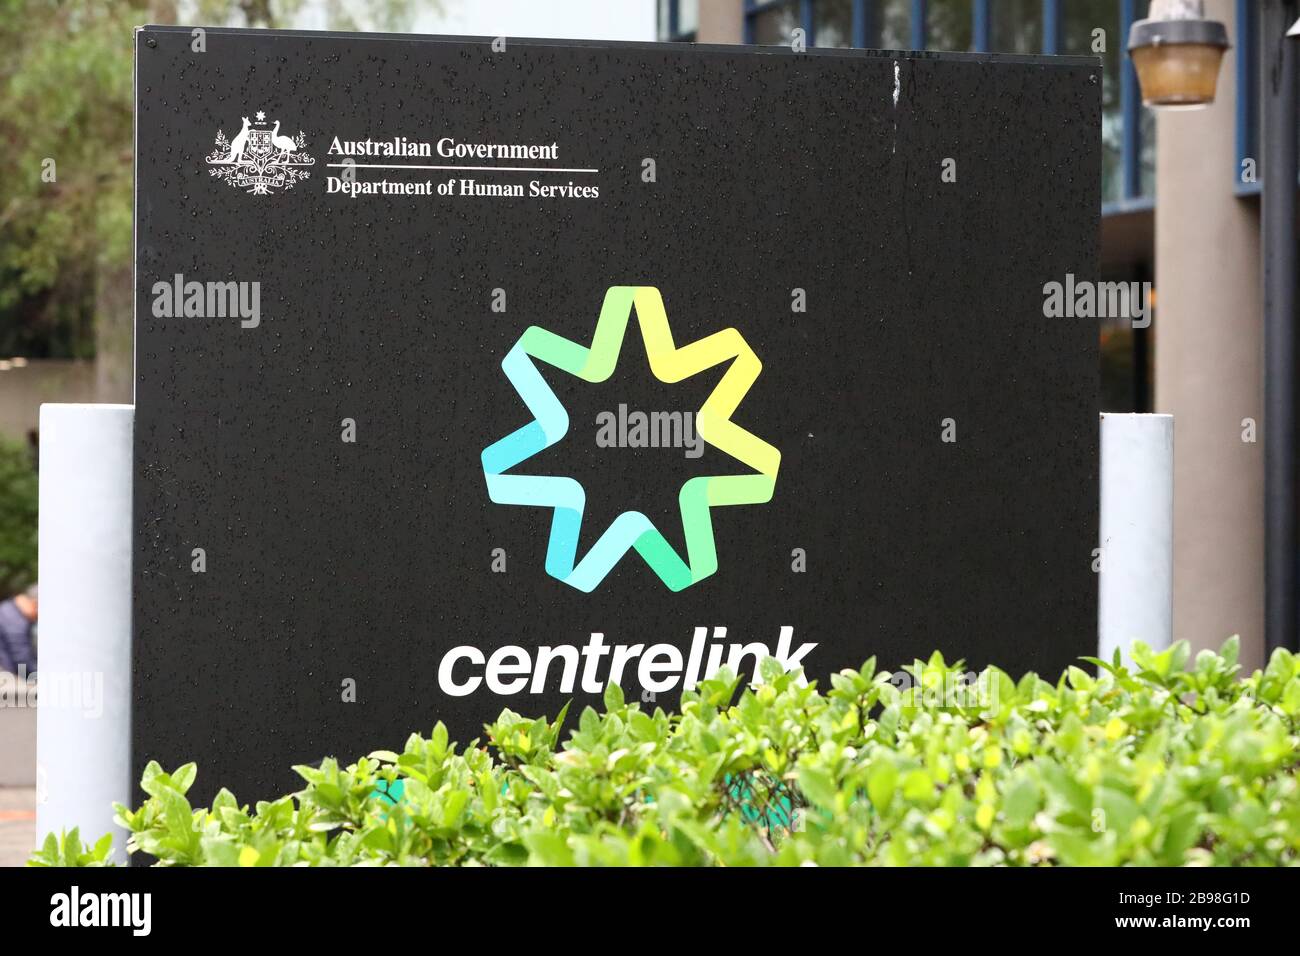 Sydney Australia 24 Mar 2020 People Line Up To Visit A Centrelink Service Centre In Burwood Sydney After Job Losses From Coronavirus Have Prompted A Surge In Demand For Unemployment Payments Credit